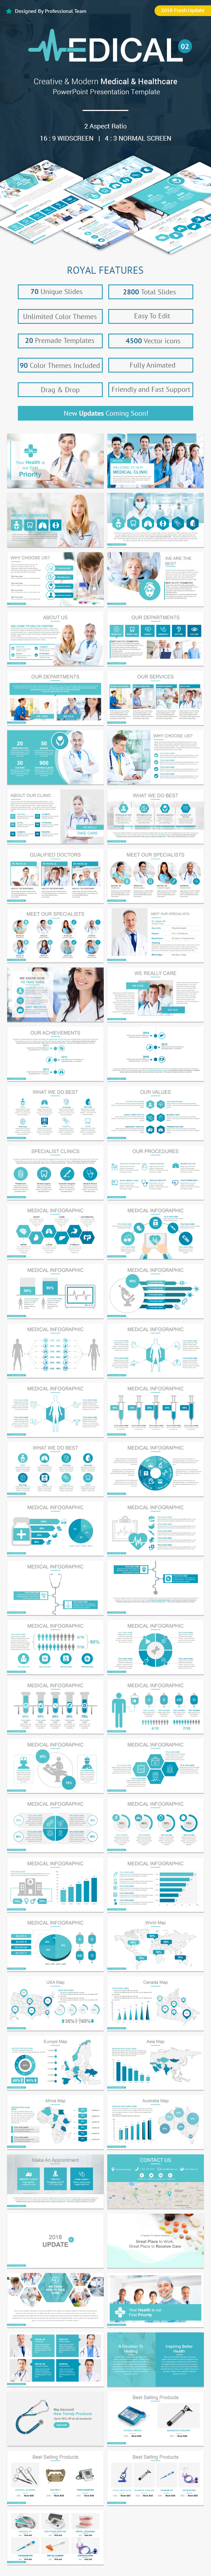 Medical and Healthcare 2 PowerPoint Presentation Template